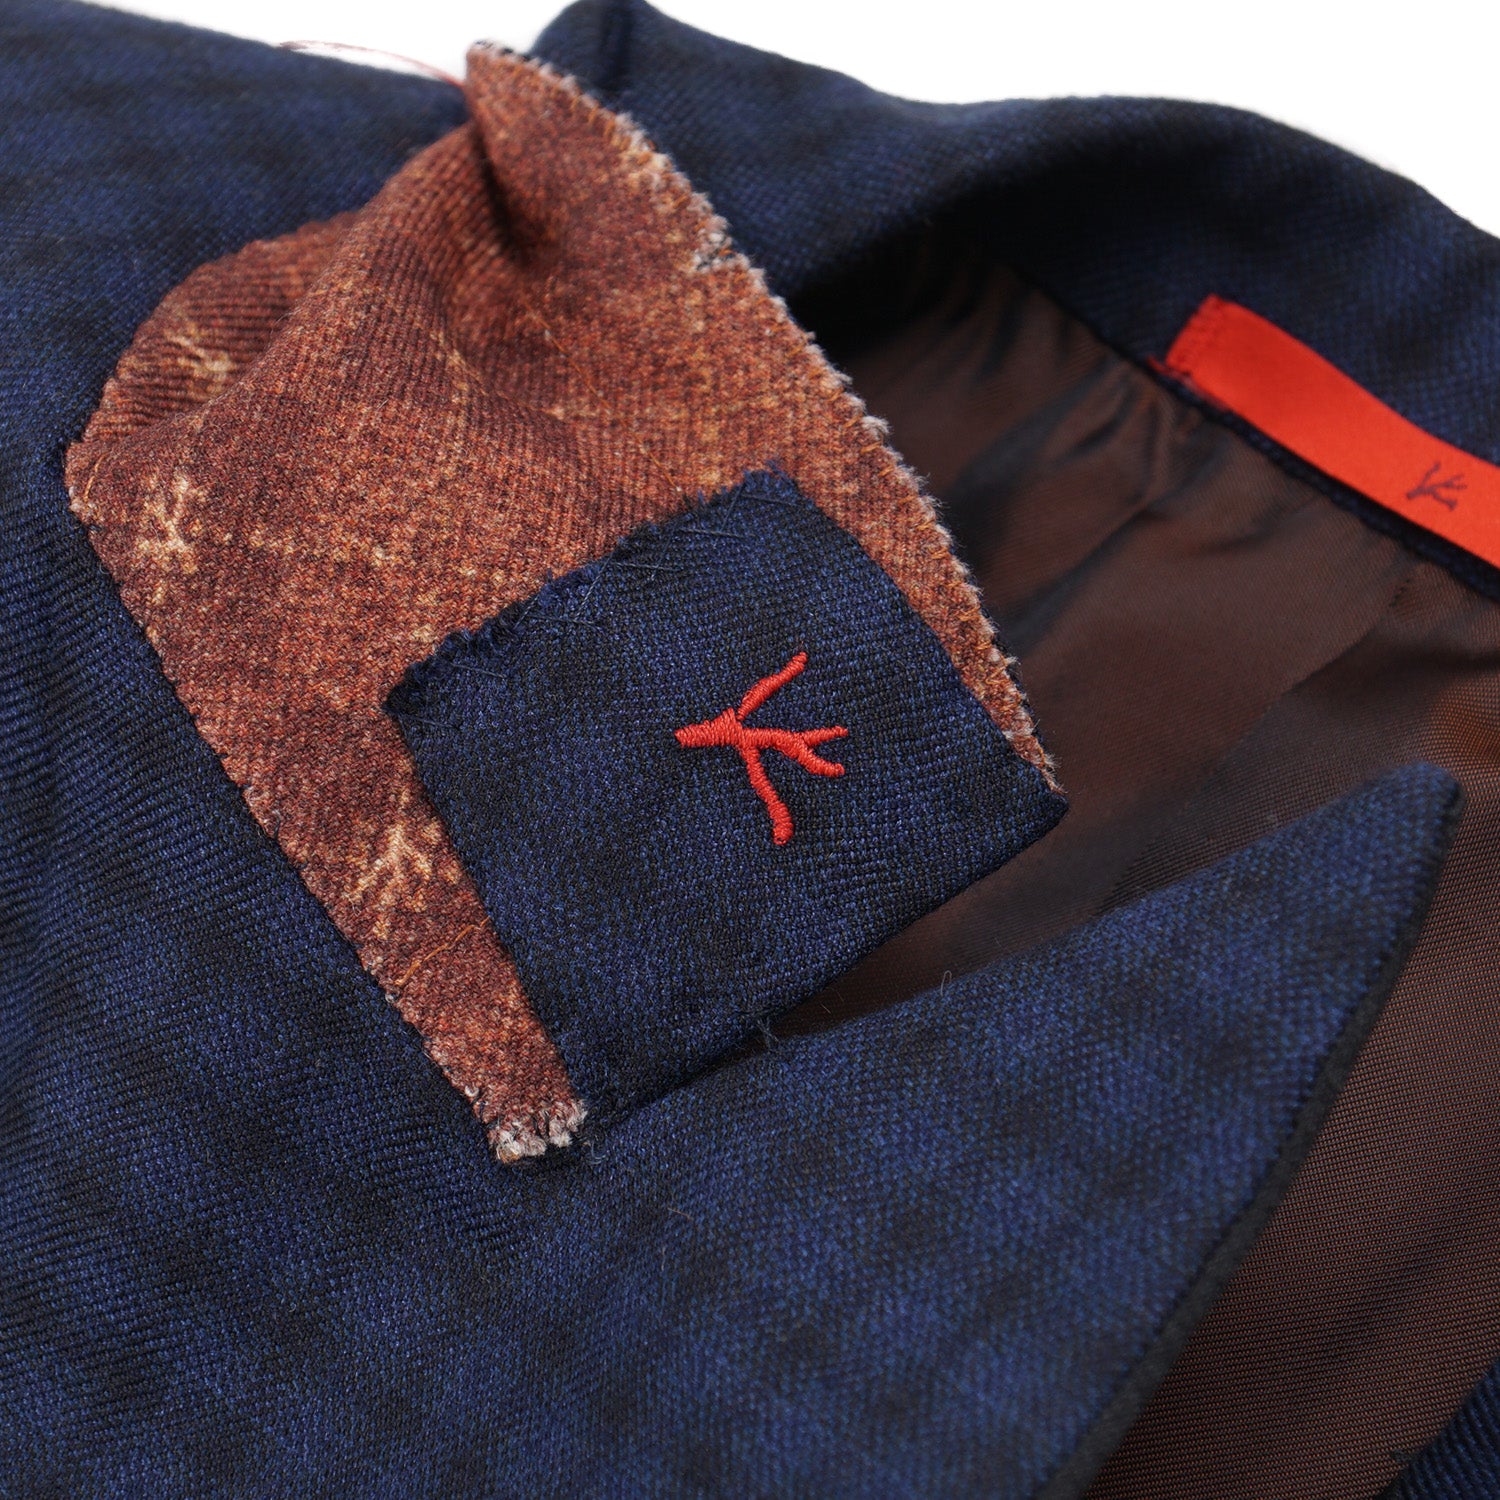 Isaia Slim-Fit Cashmere and Silk Dinner Jacket - Top Shelf Apparel